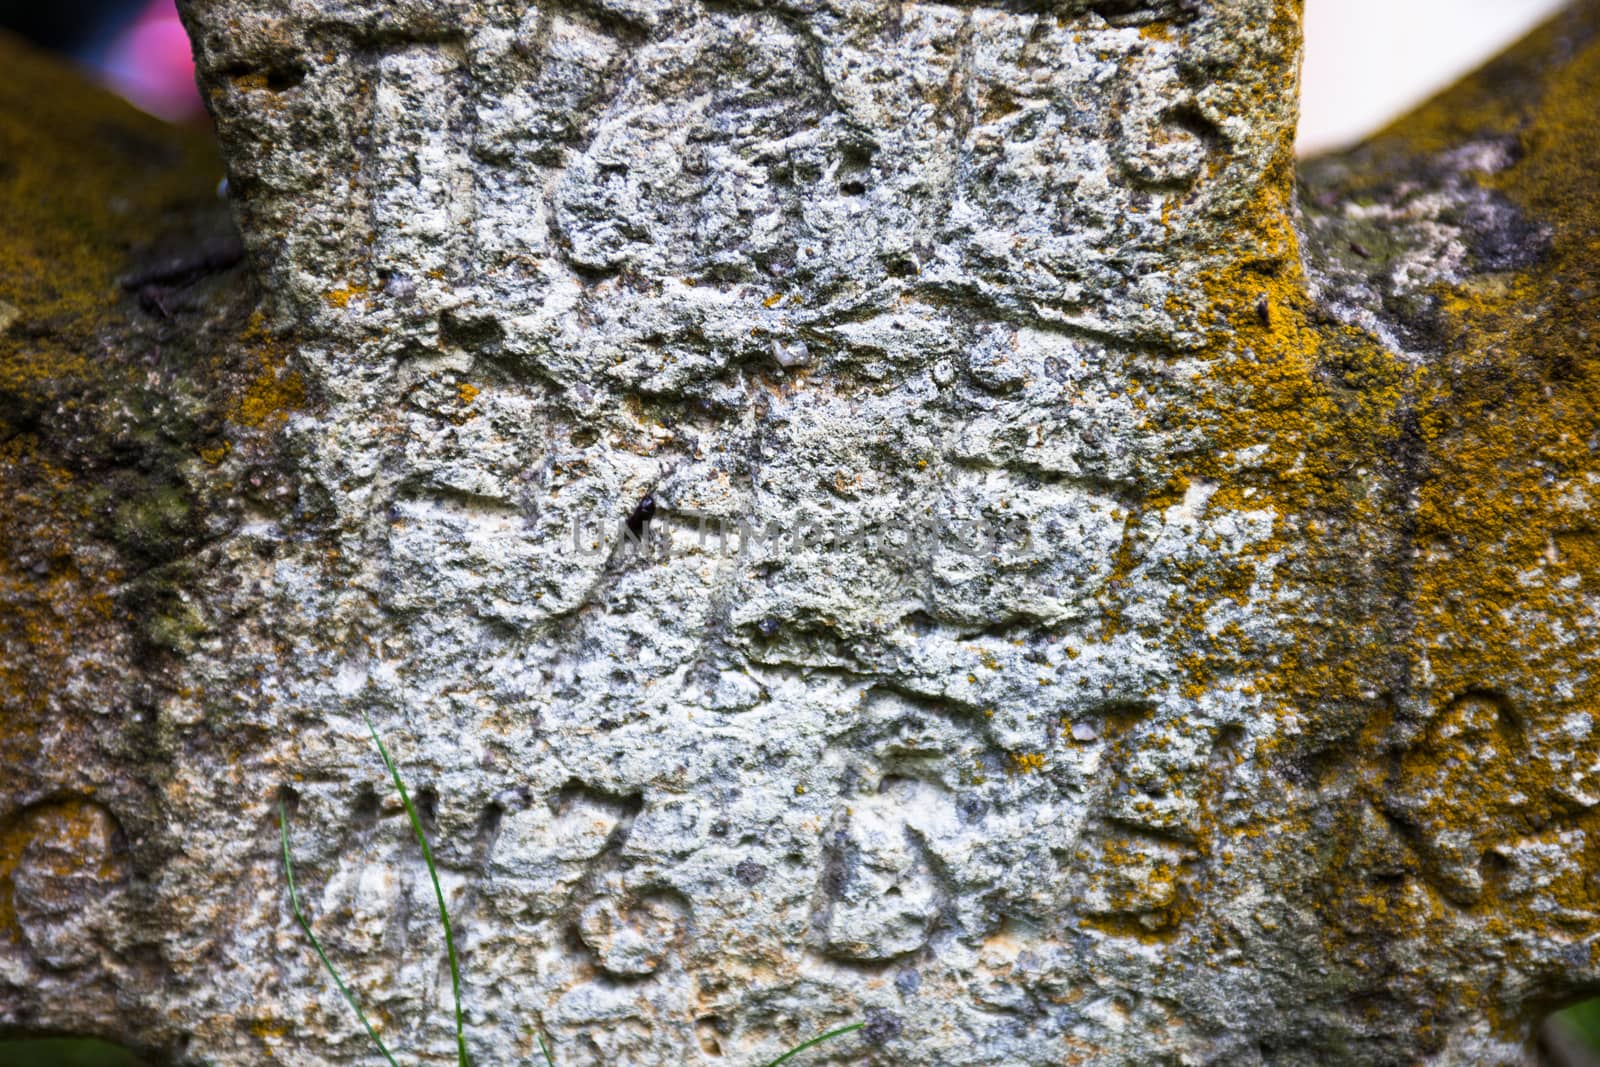 Moss-grown surface of the old stone cross by rootstocks